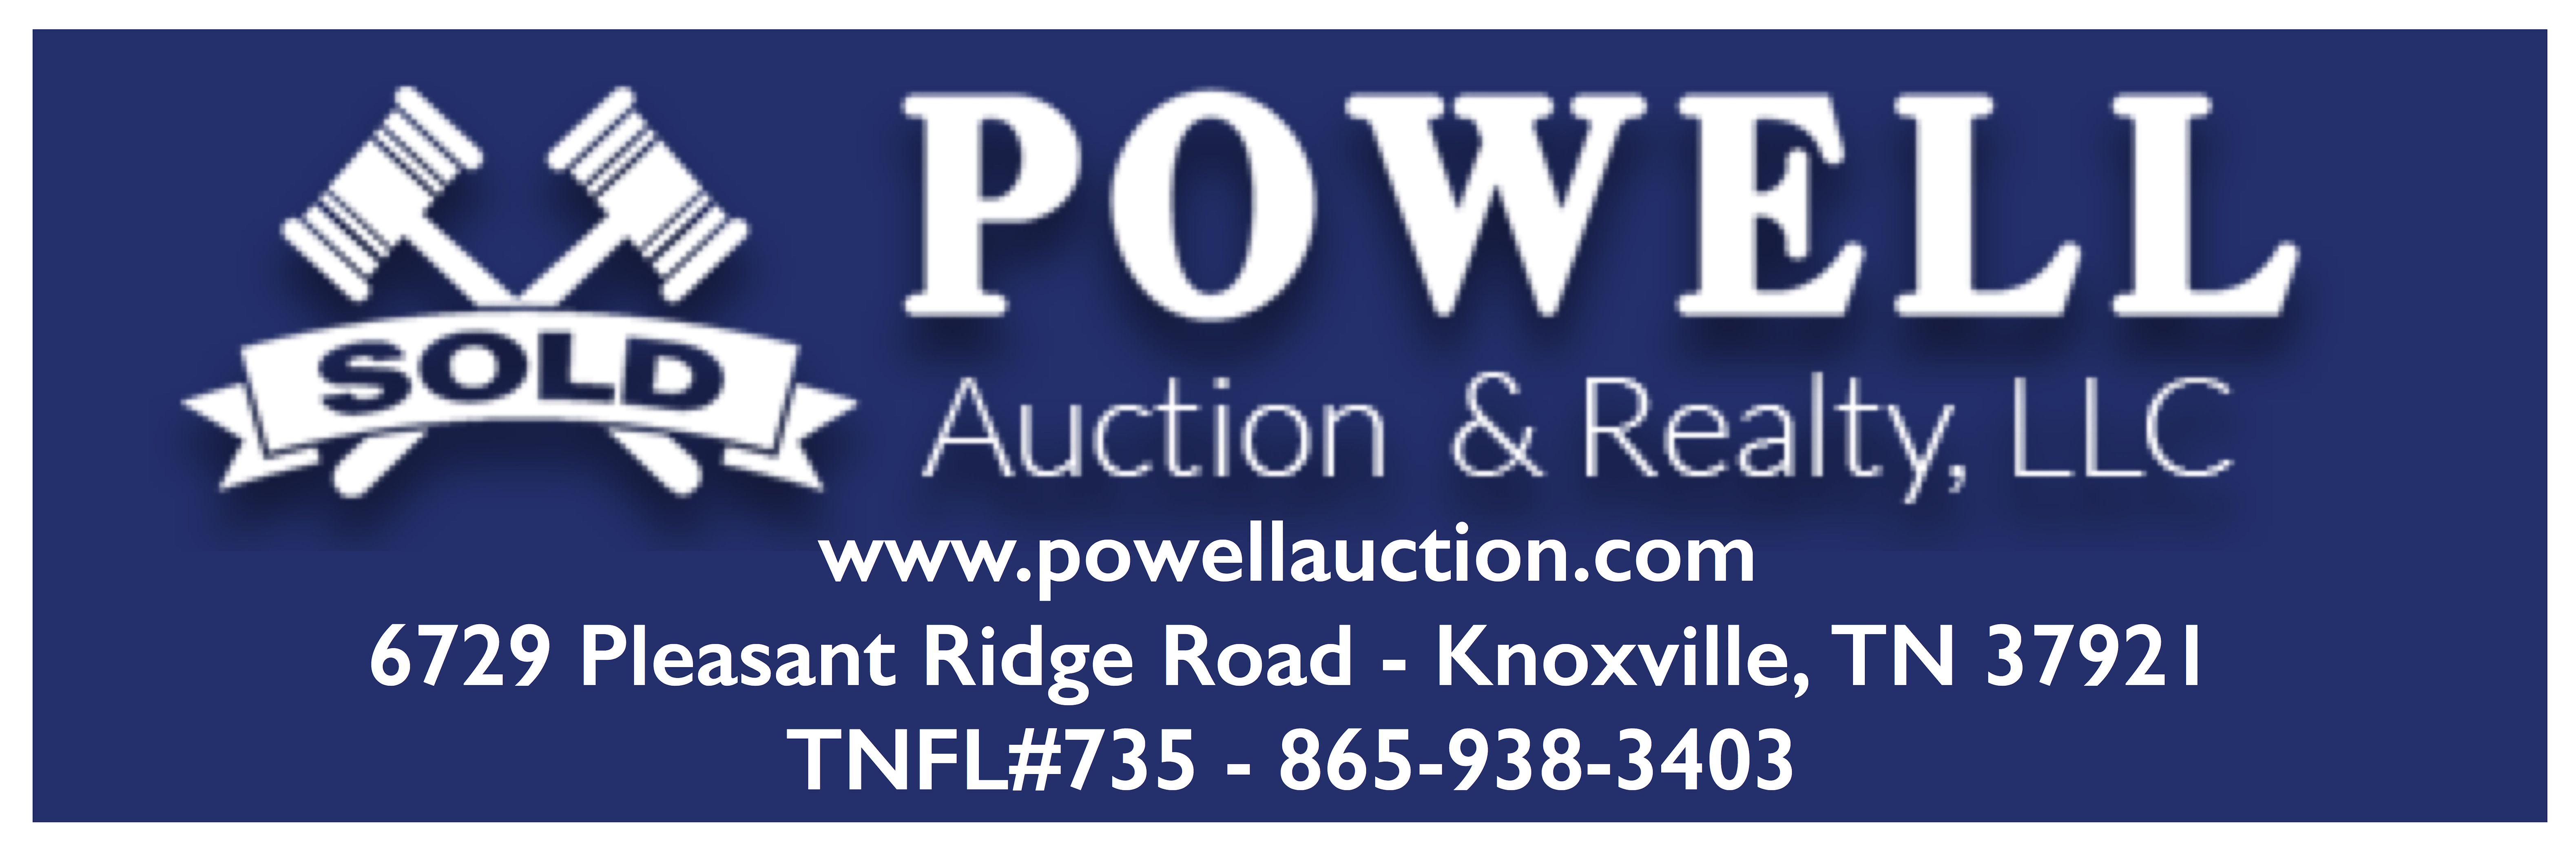 Powell Logo - Powell Logo - Footer - Blue & White - Powell Auction